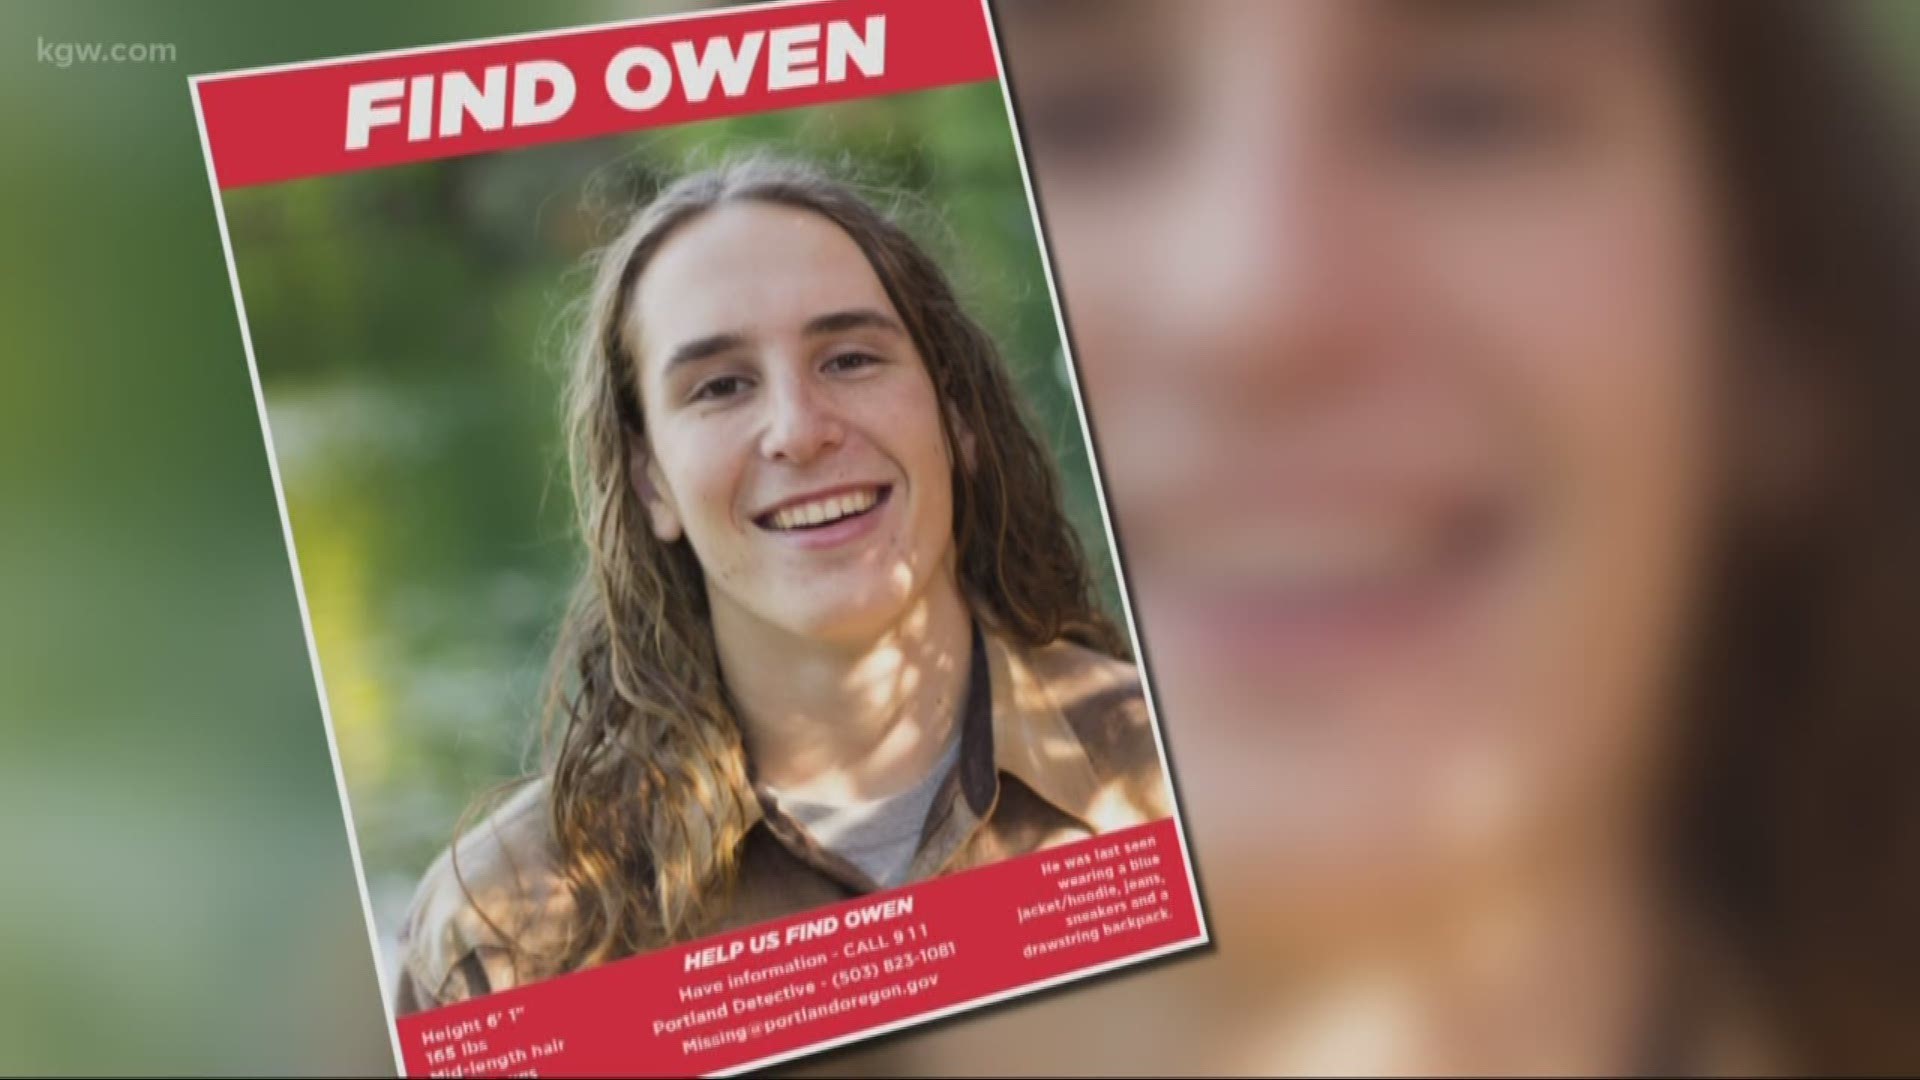 Family and friends of missing University of Portland student Owen Klinger aren't giving up hope. His family said they plan to have more search parties.